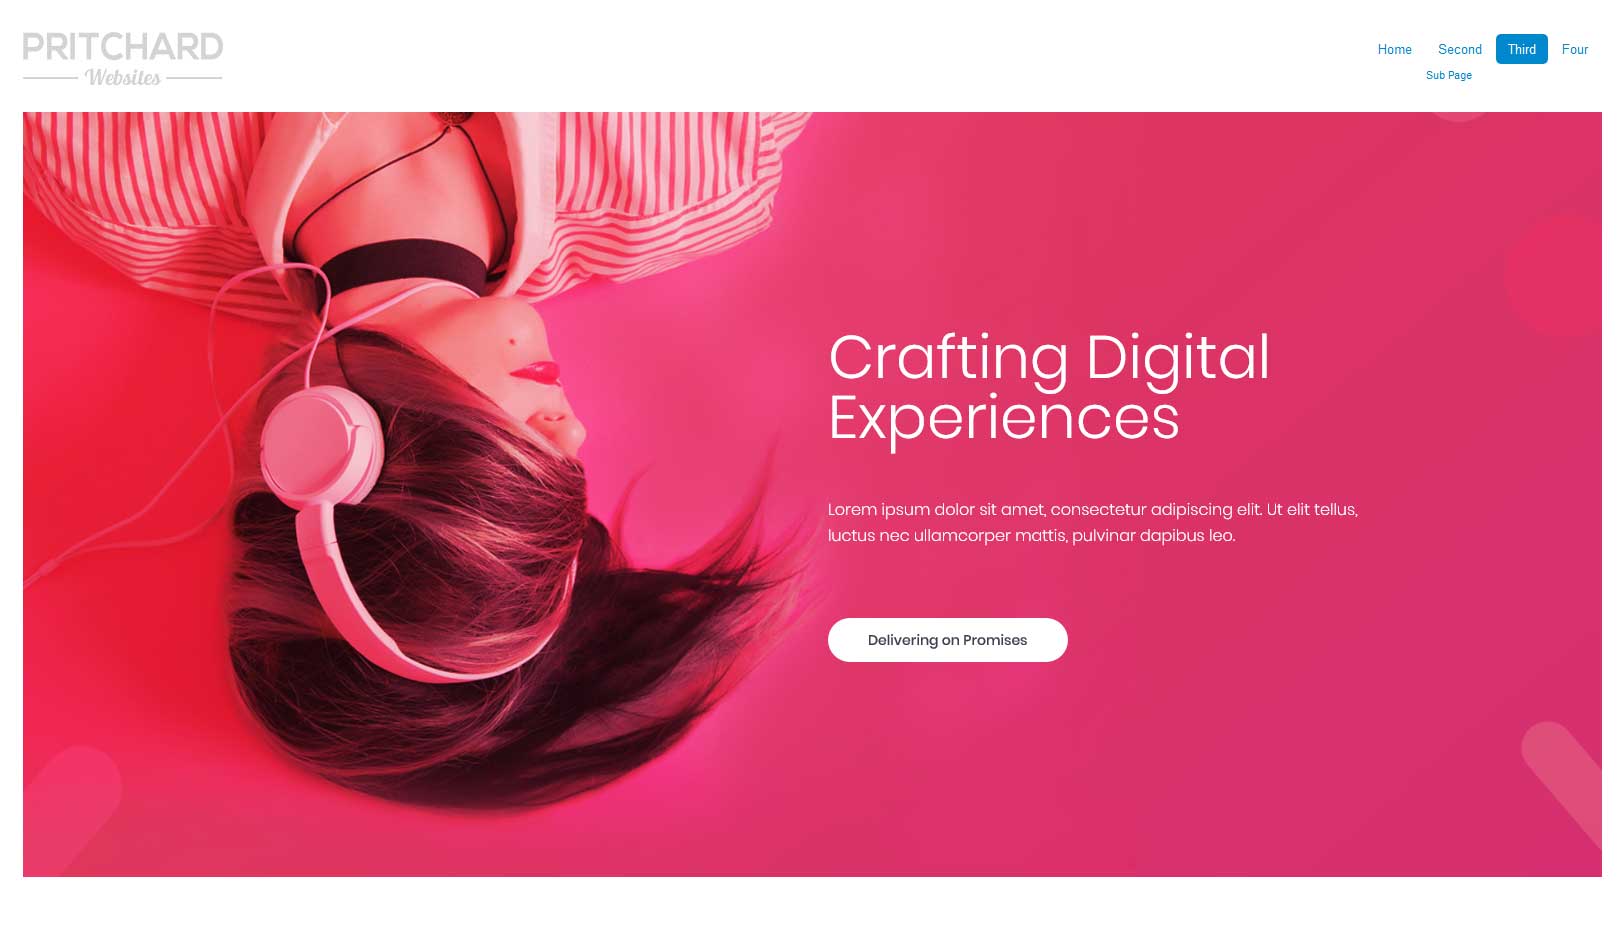 images/Portfolio-images/Our-Custom-Website-Themes/drag-and-drop.jpg#joomlaImage://local-images/Portfolio-images/Our-Custom-Website-Themes/drag-and-drop.jpg?width=1624&height=950